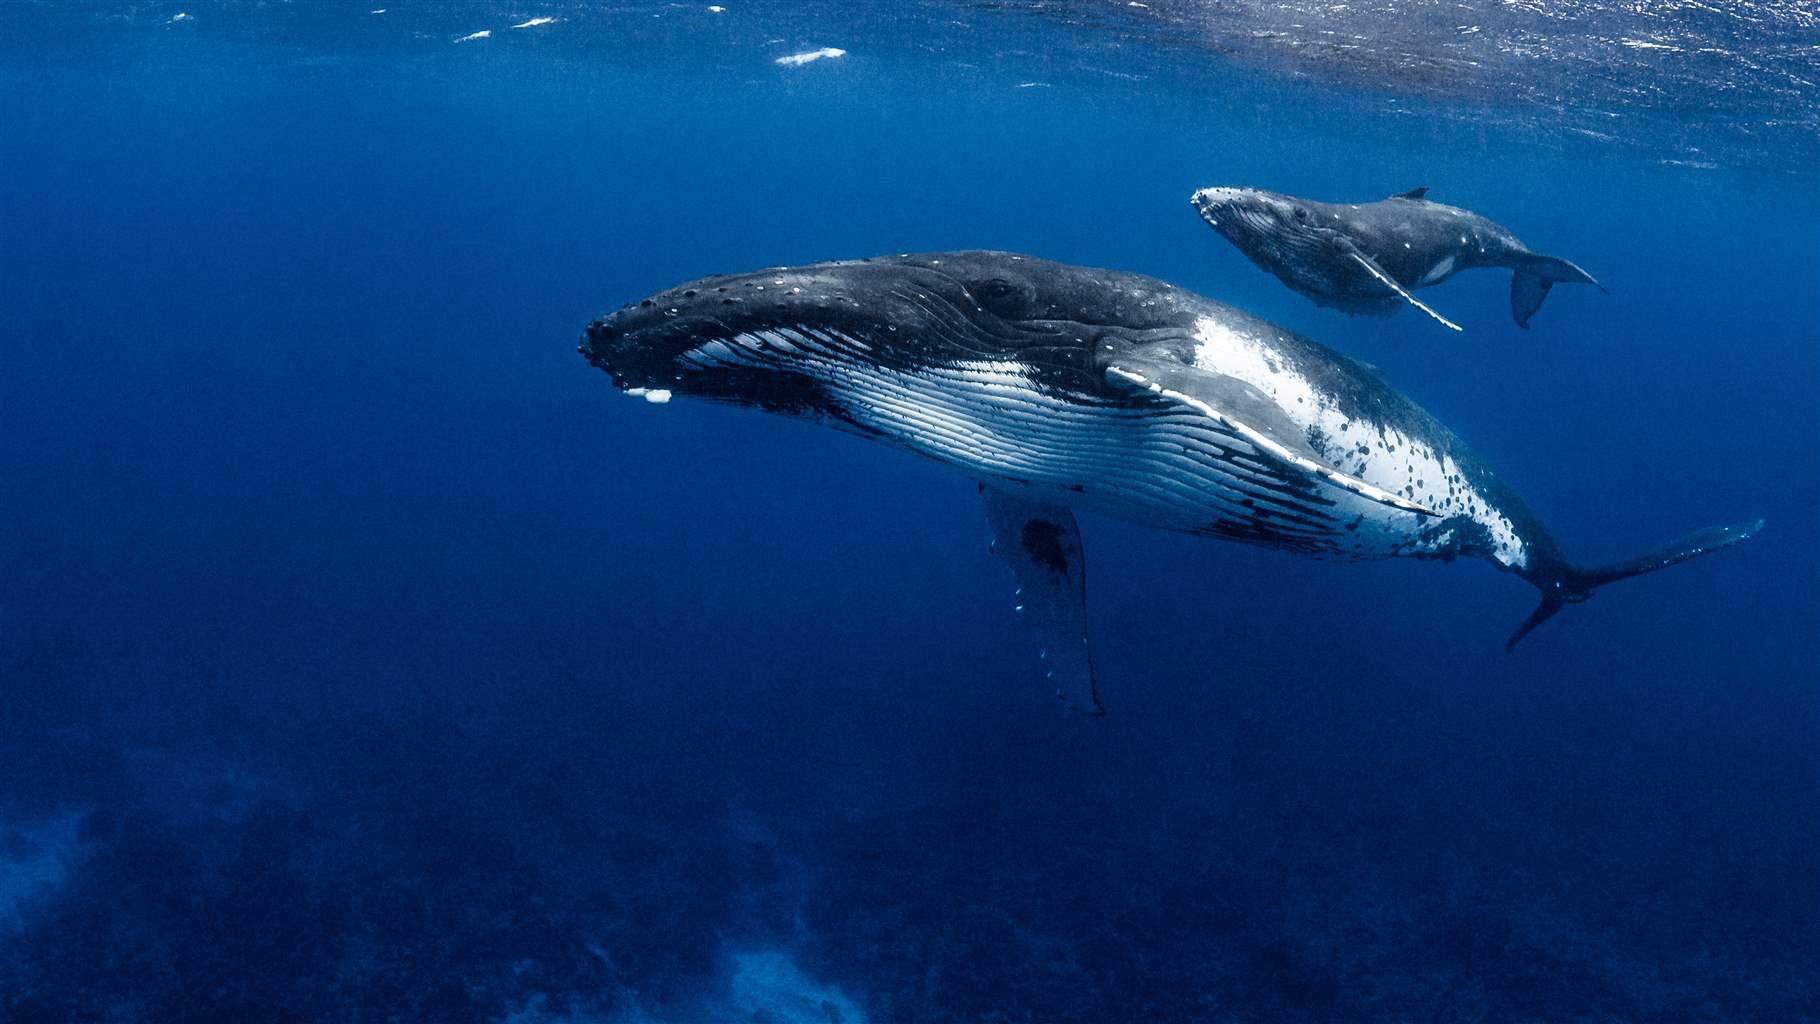 A white and black humpback whale and calf swim in the dark blue waters near the surface, with the sea bottom murkily visible.